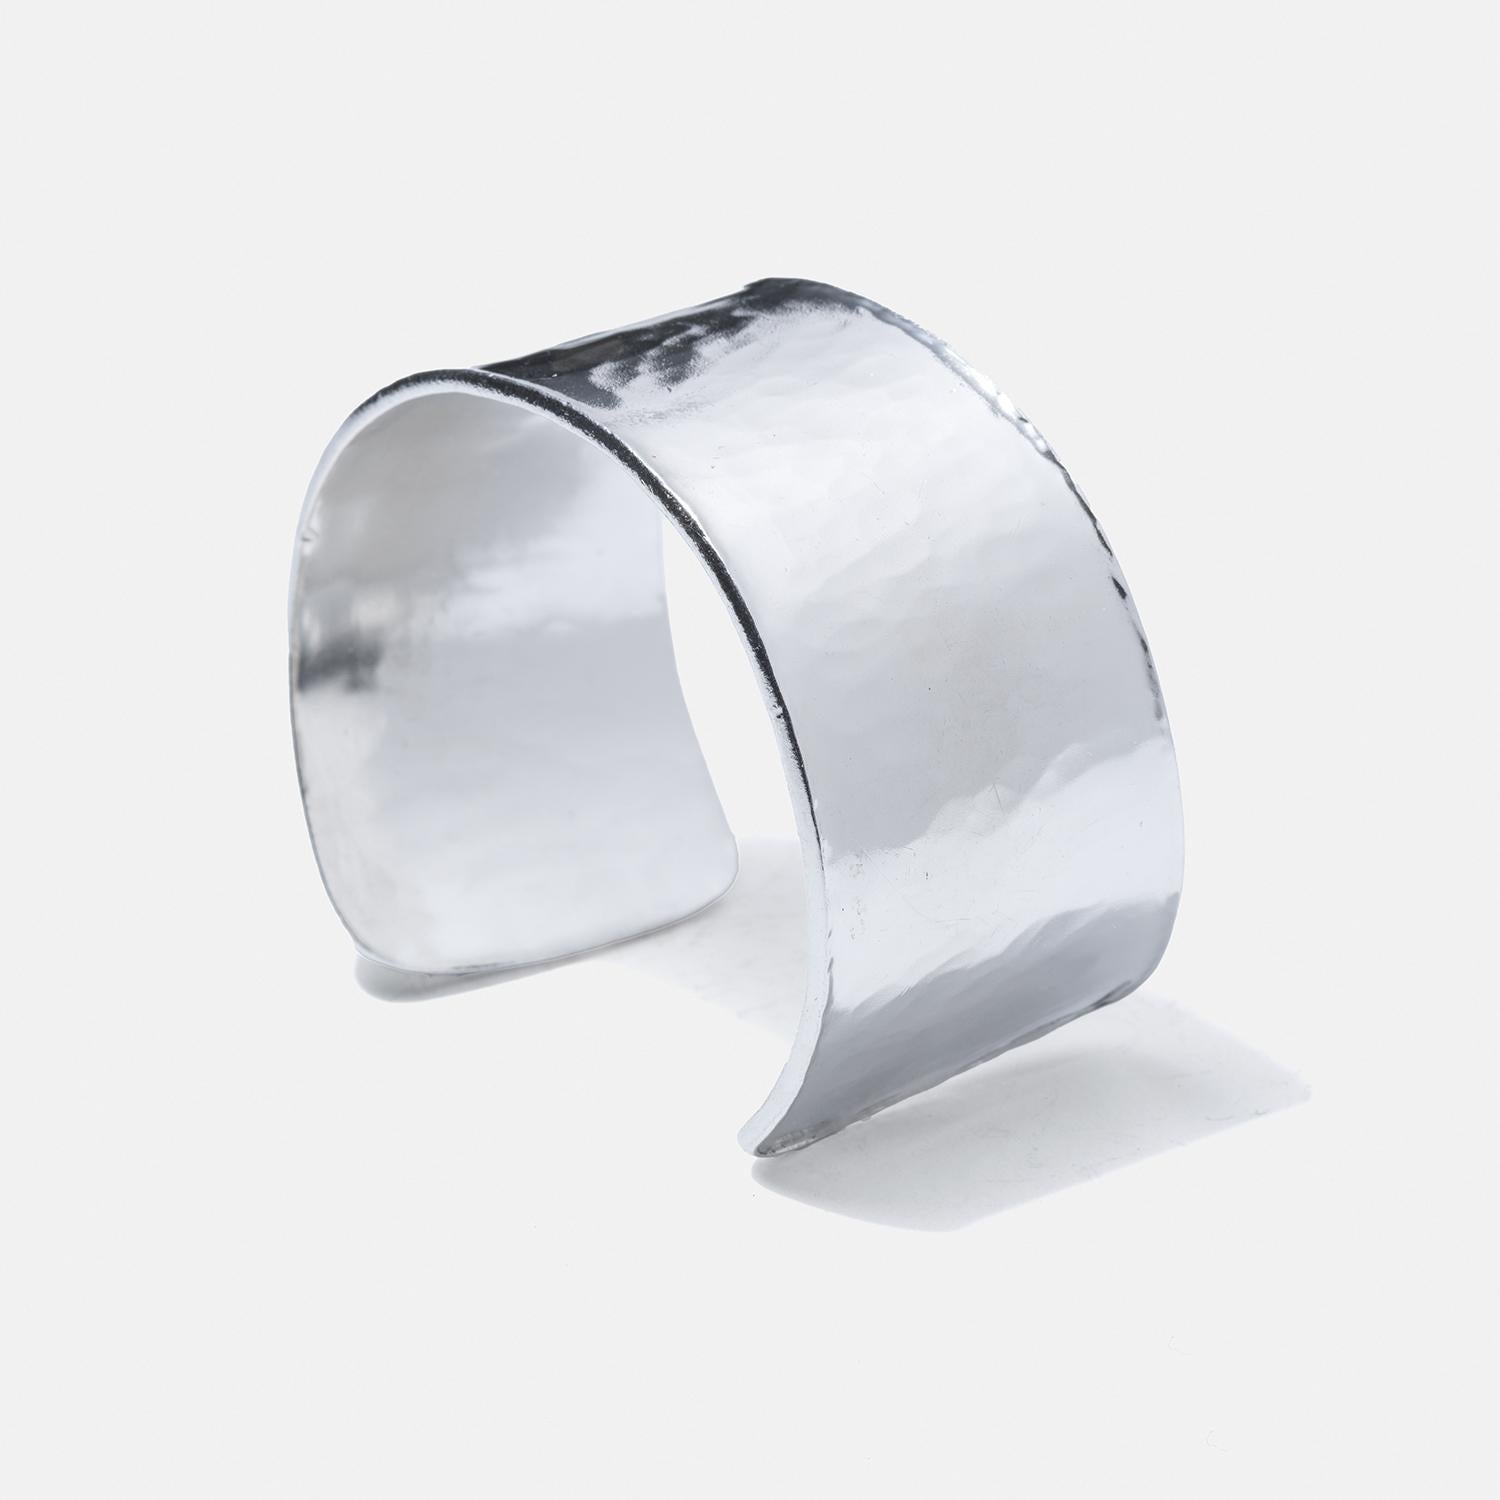 This sterling silver cuff bracelet features a broad, slightly curved band with deliberately uneven, slightly tapered ends, enhancing its artisanal charm. Its surface displays a textured, hammered finish that catches light and adds a rugged yet